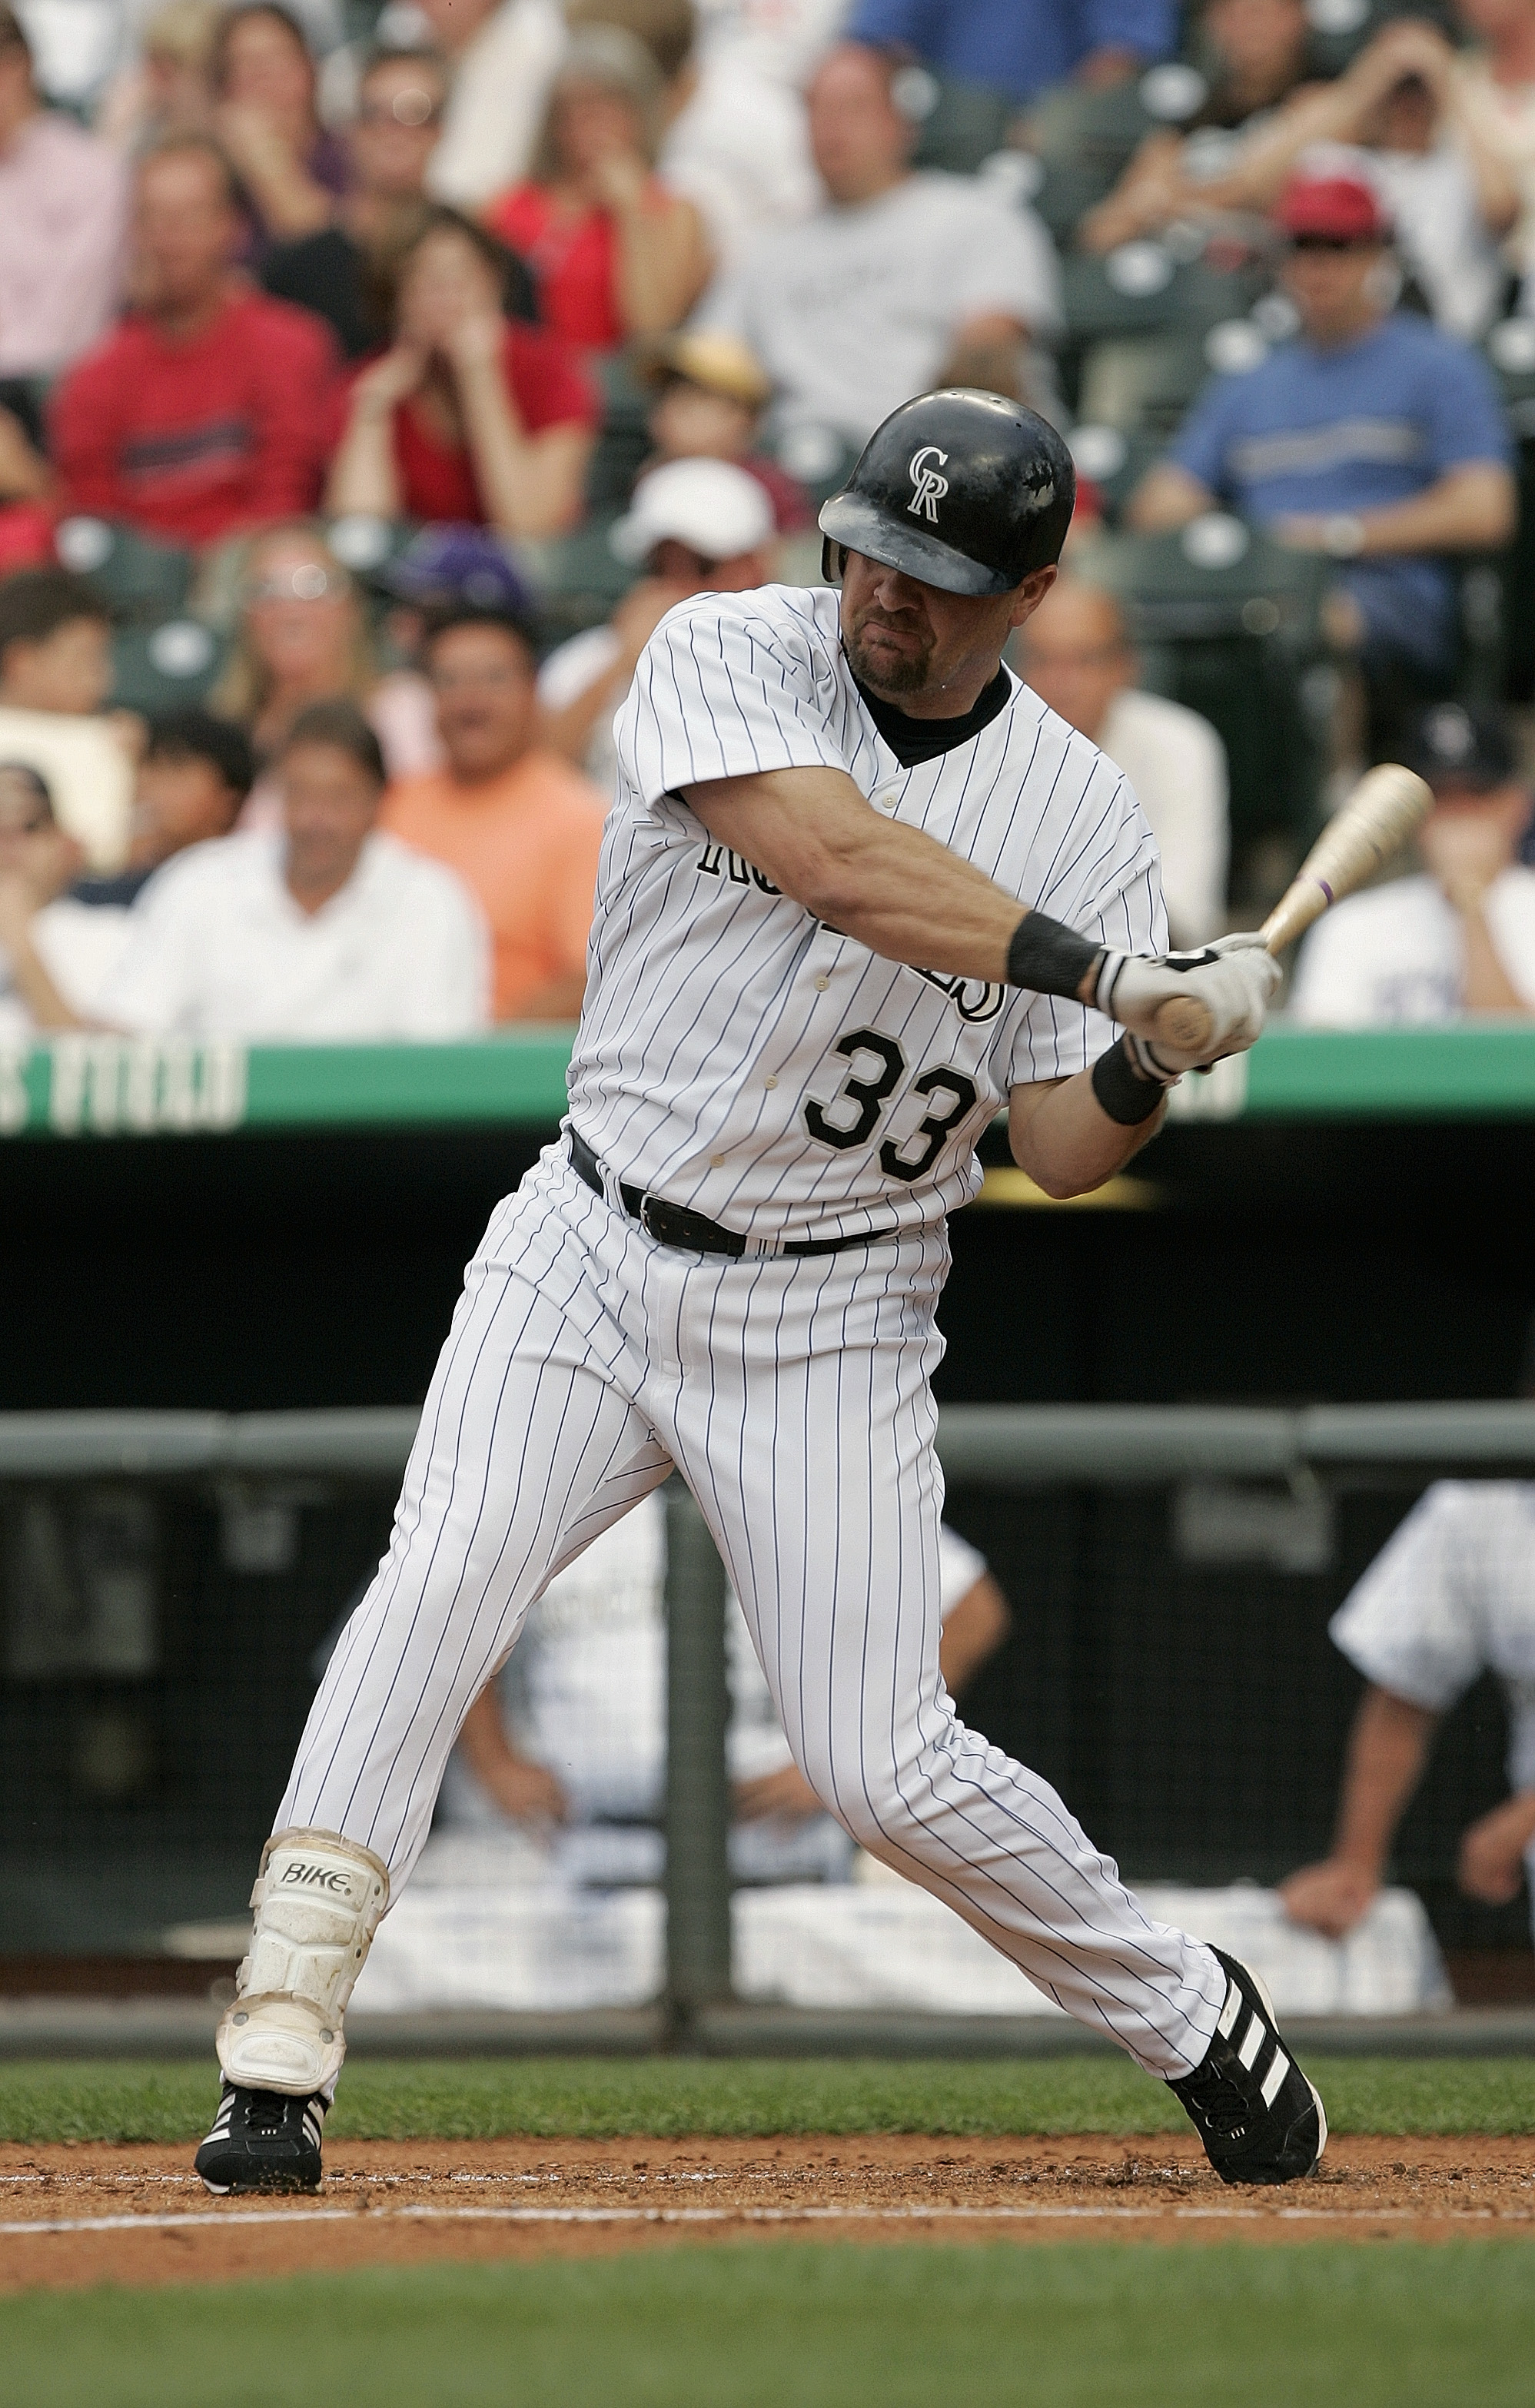 DENVER - JULY 3:  Outfielder Larry Walker #33 of the Colorado Rockies swings at a Detroit Tigers pitch during the interleague game at Coors Field on July 3, 2004 in Denver, Colorado.  The Rockies defeated the Tigers 11-6.  (Photo by Brian Bahr/Getty Image